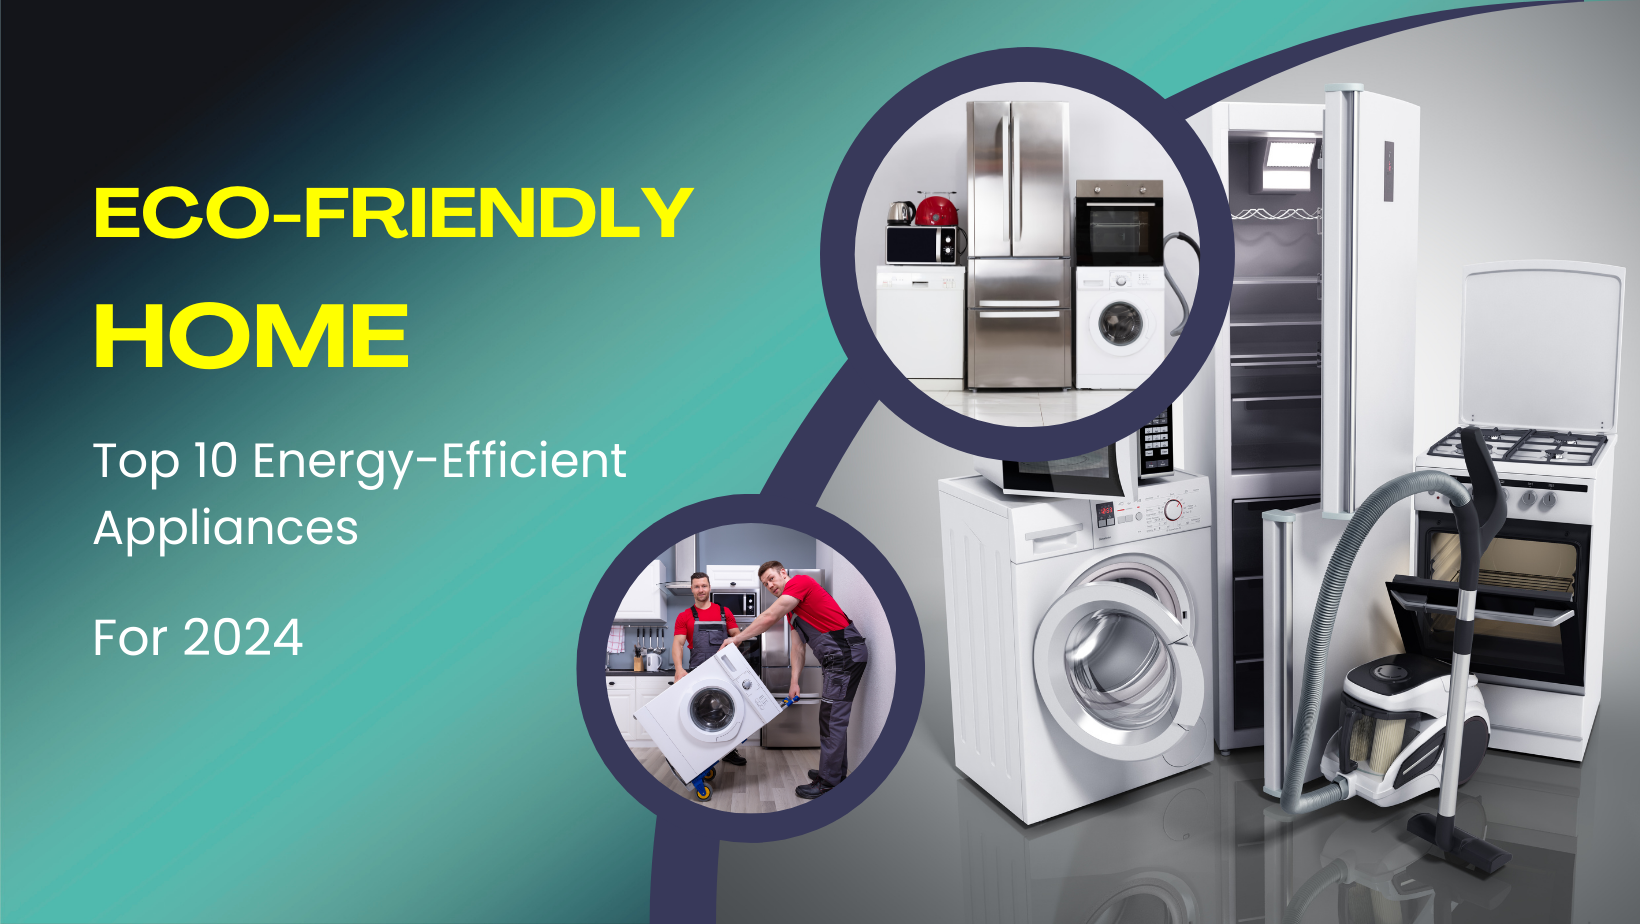 Top 10 Energy-Efficient-Appliances for Eco-Friendly Home in 2024